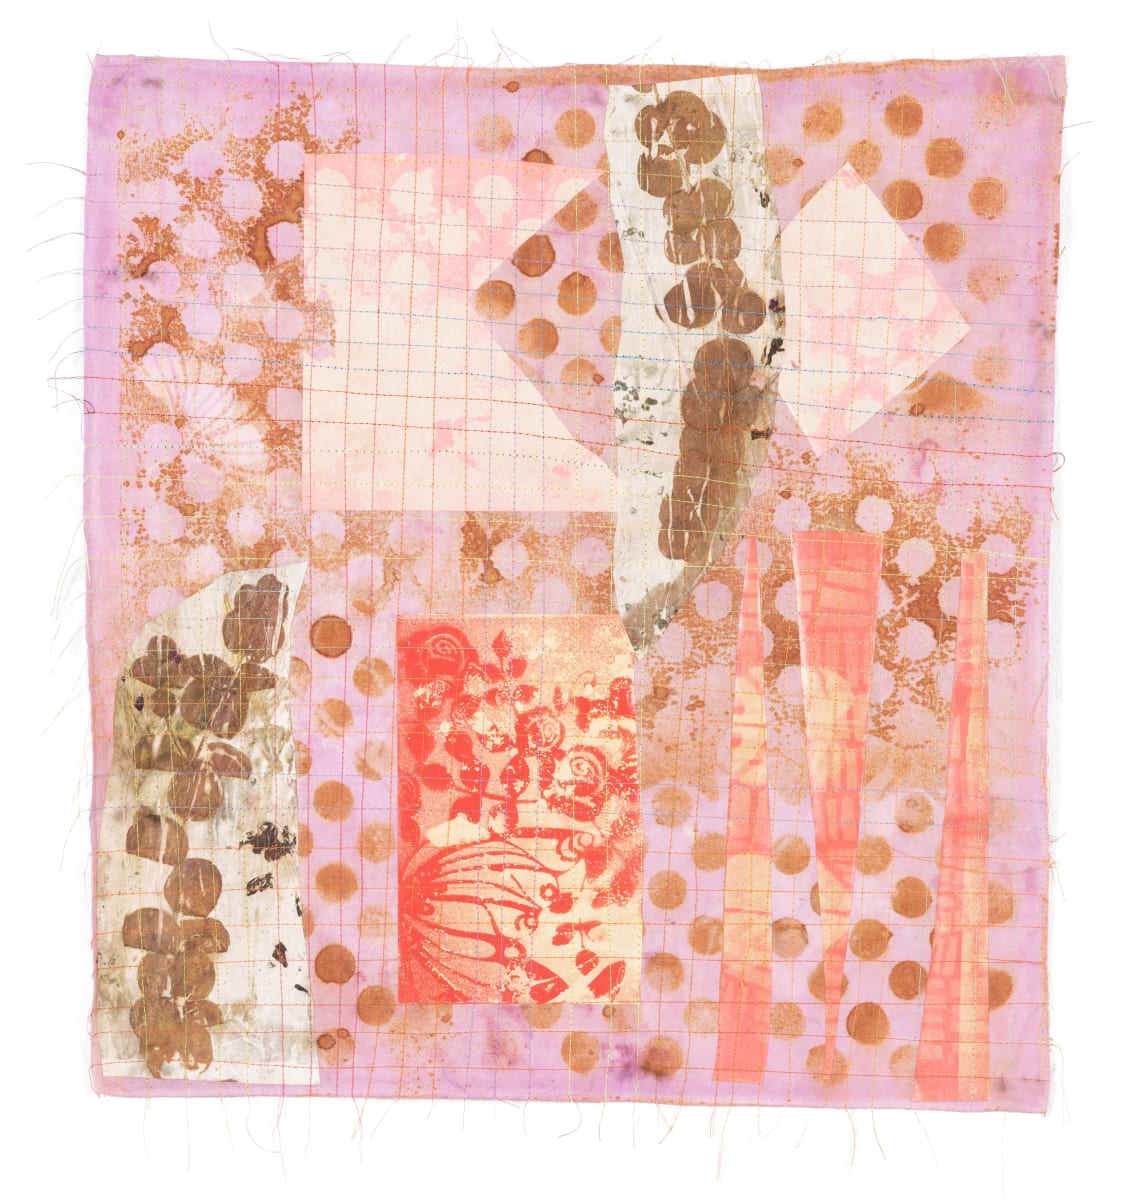 Abstract Cloth Collage 14 by Hollie Heller 